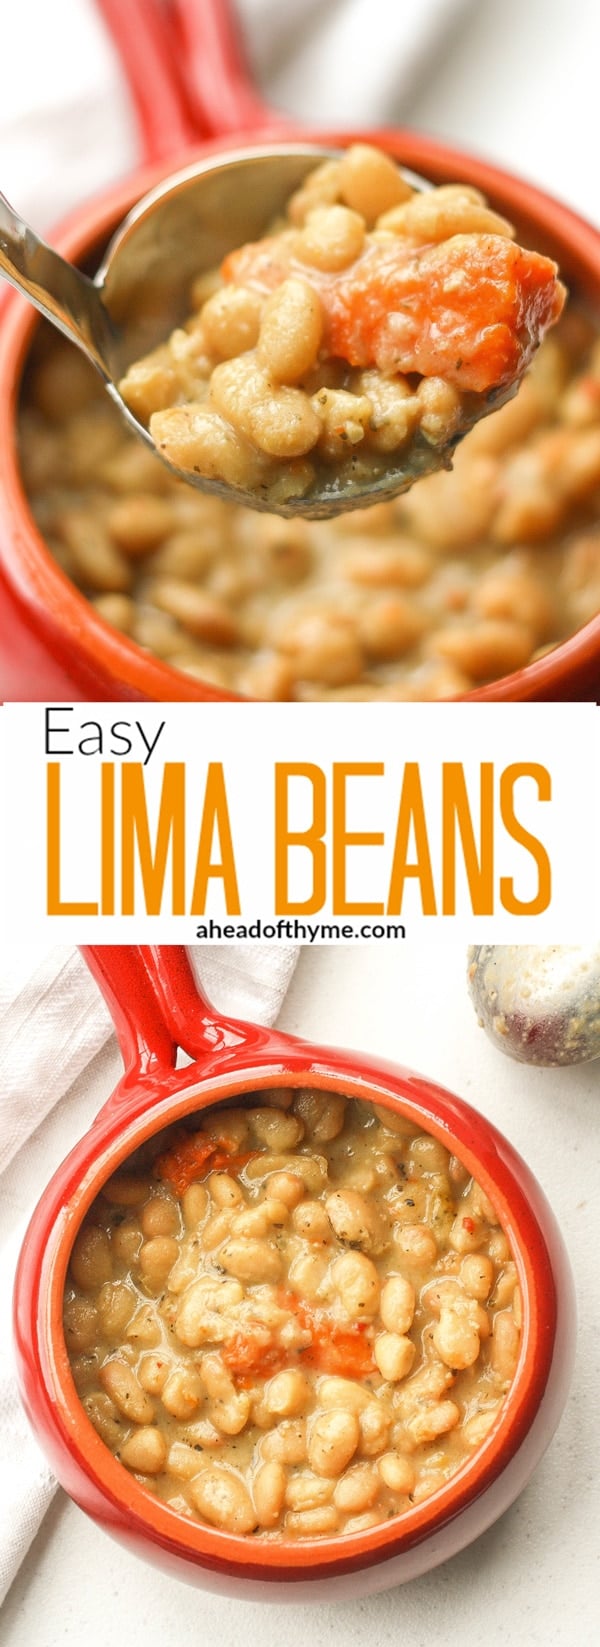 Easy Lima Beans | Ahead of Thyme